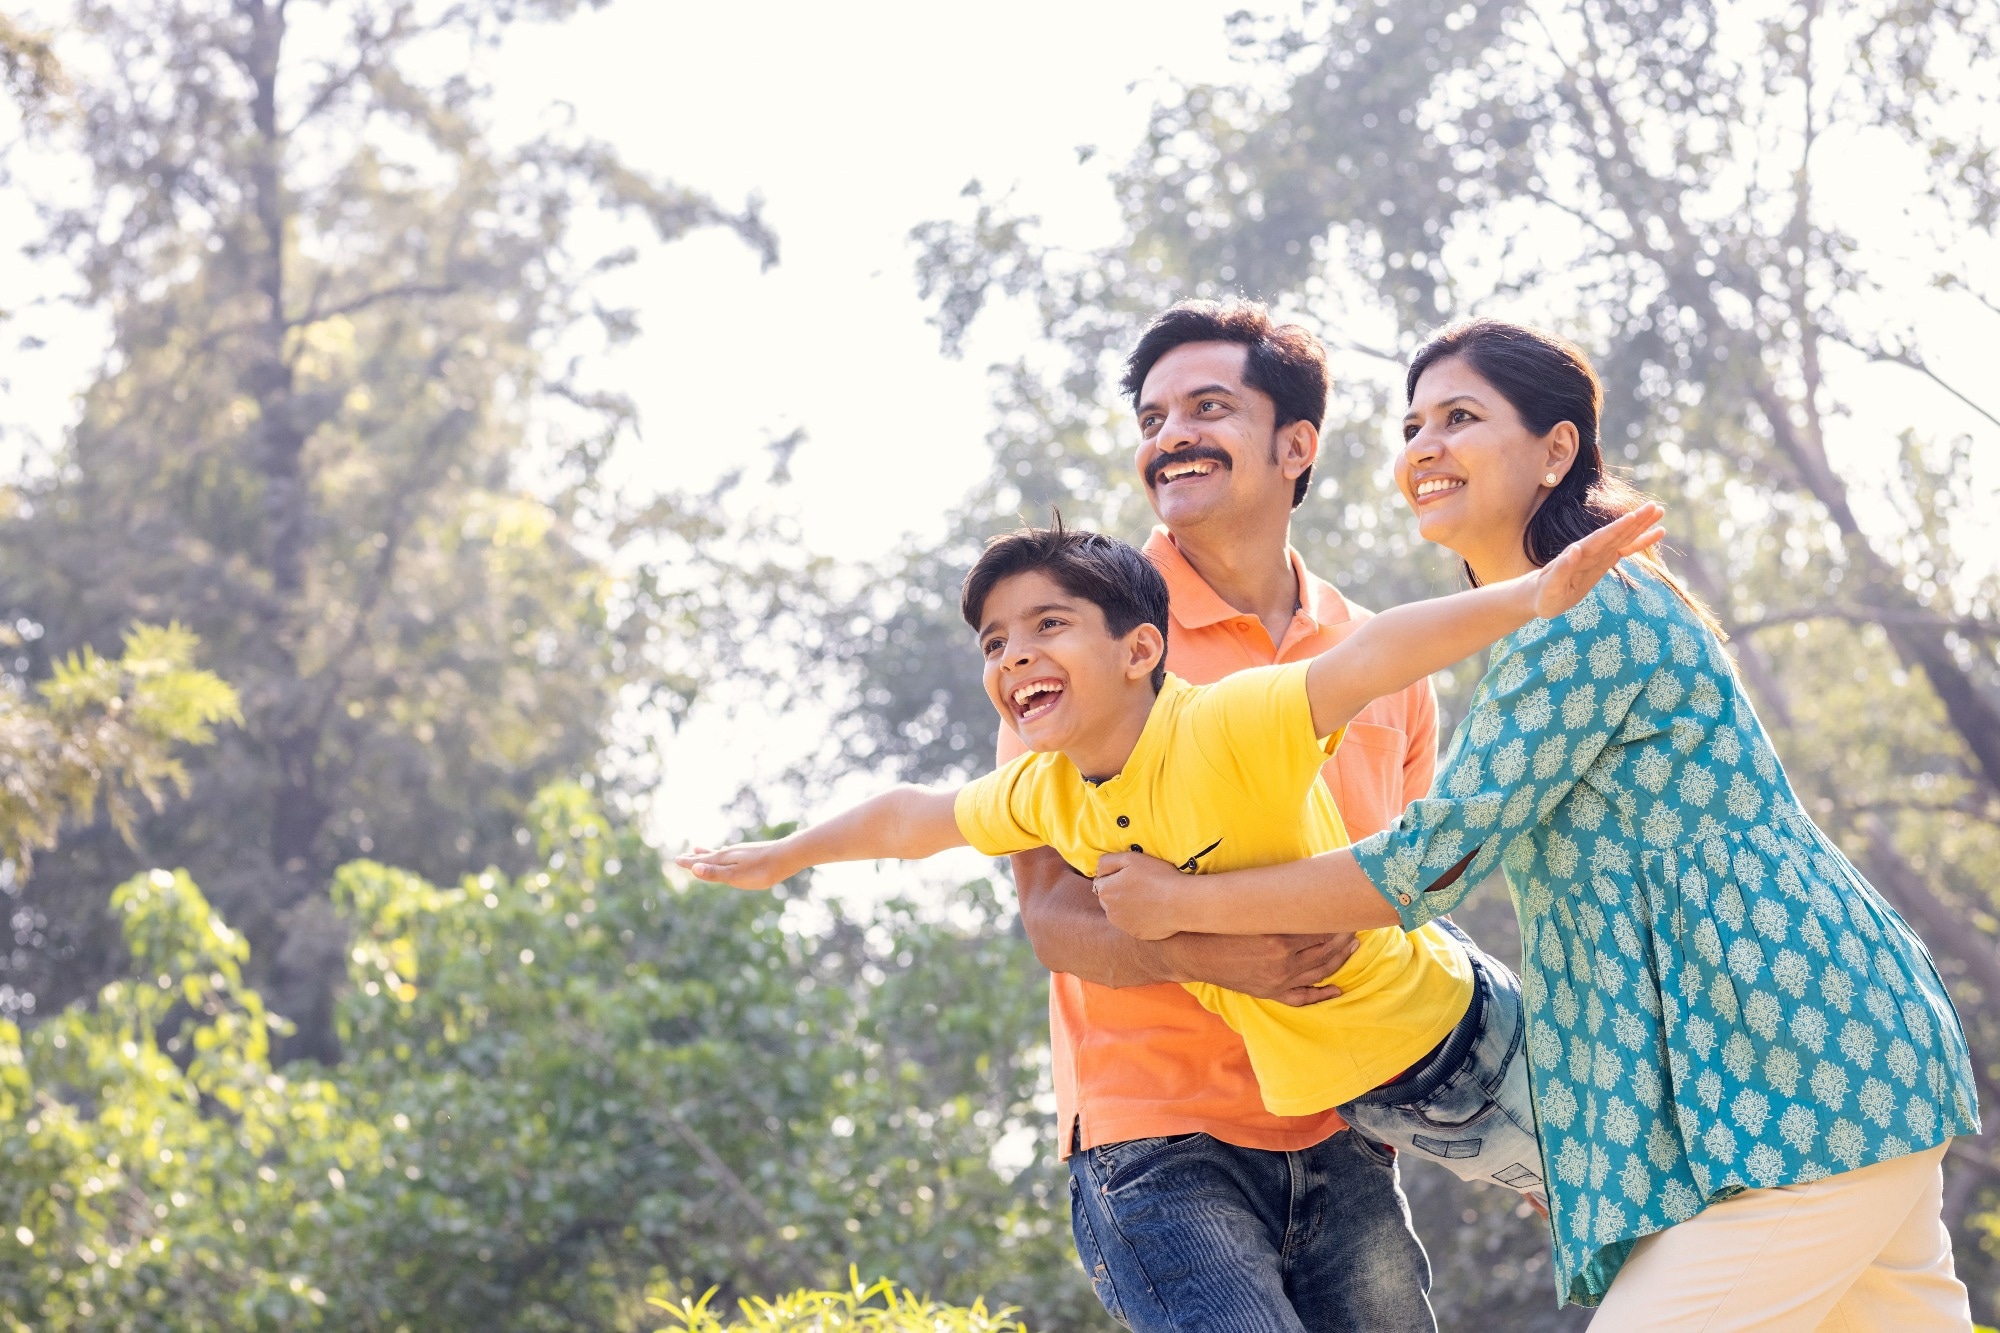 Study: Family Norms in an Era of Low Fertility.  Image credit: IndianFaces/Shutterstock